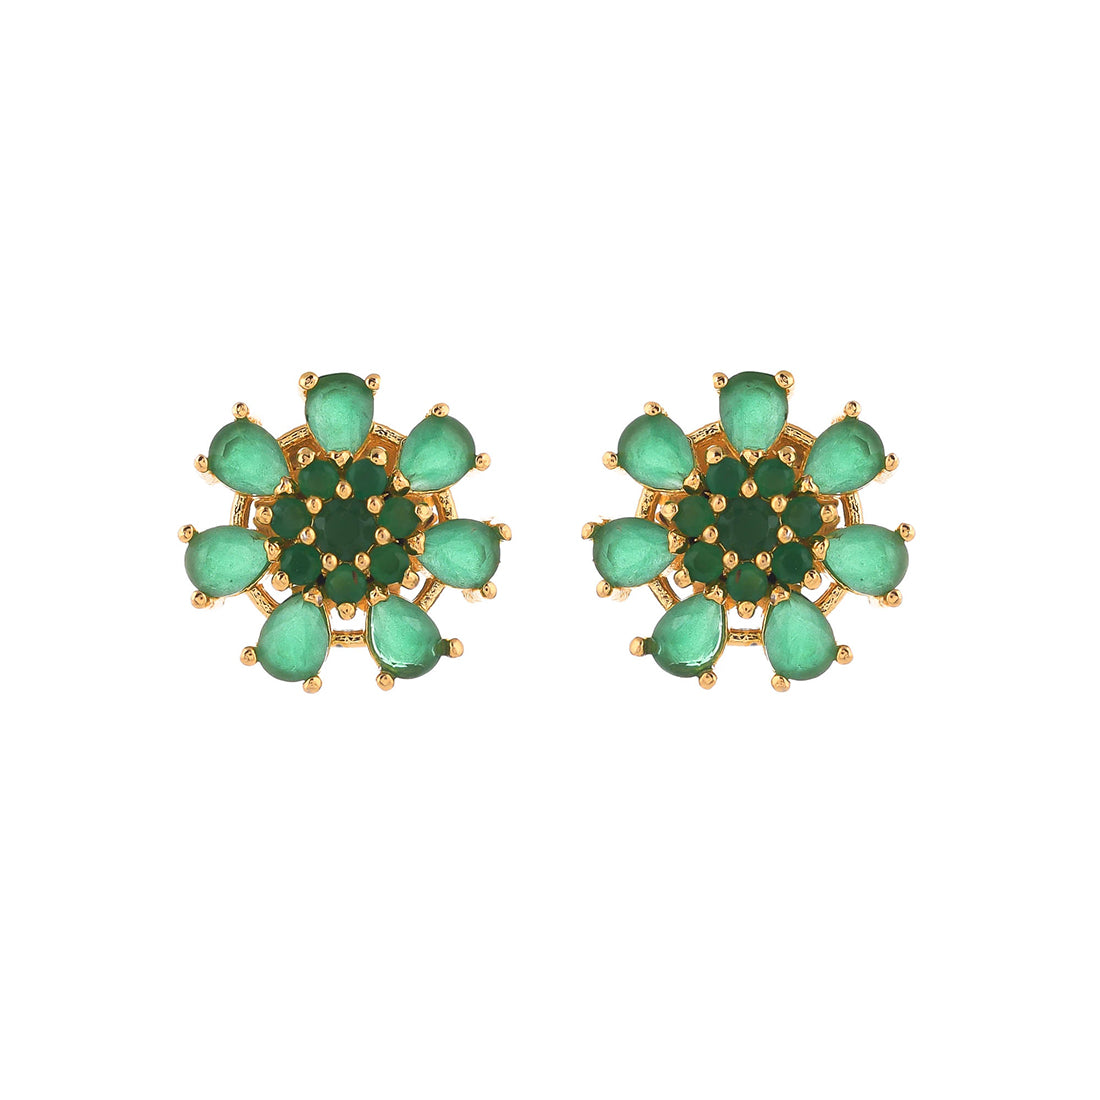 Gold Plated Green Cz Stud Earrings